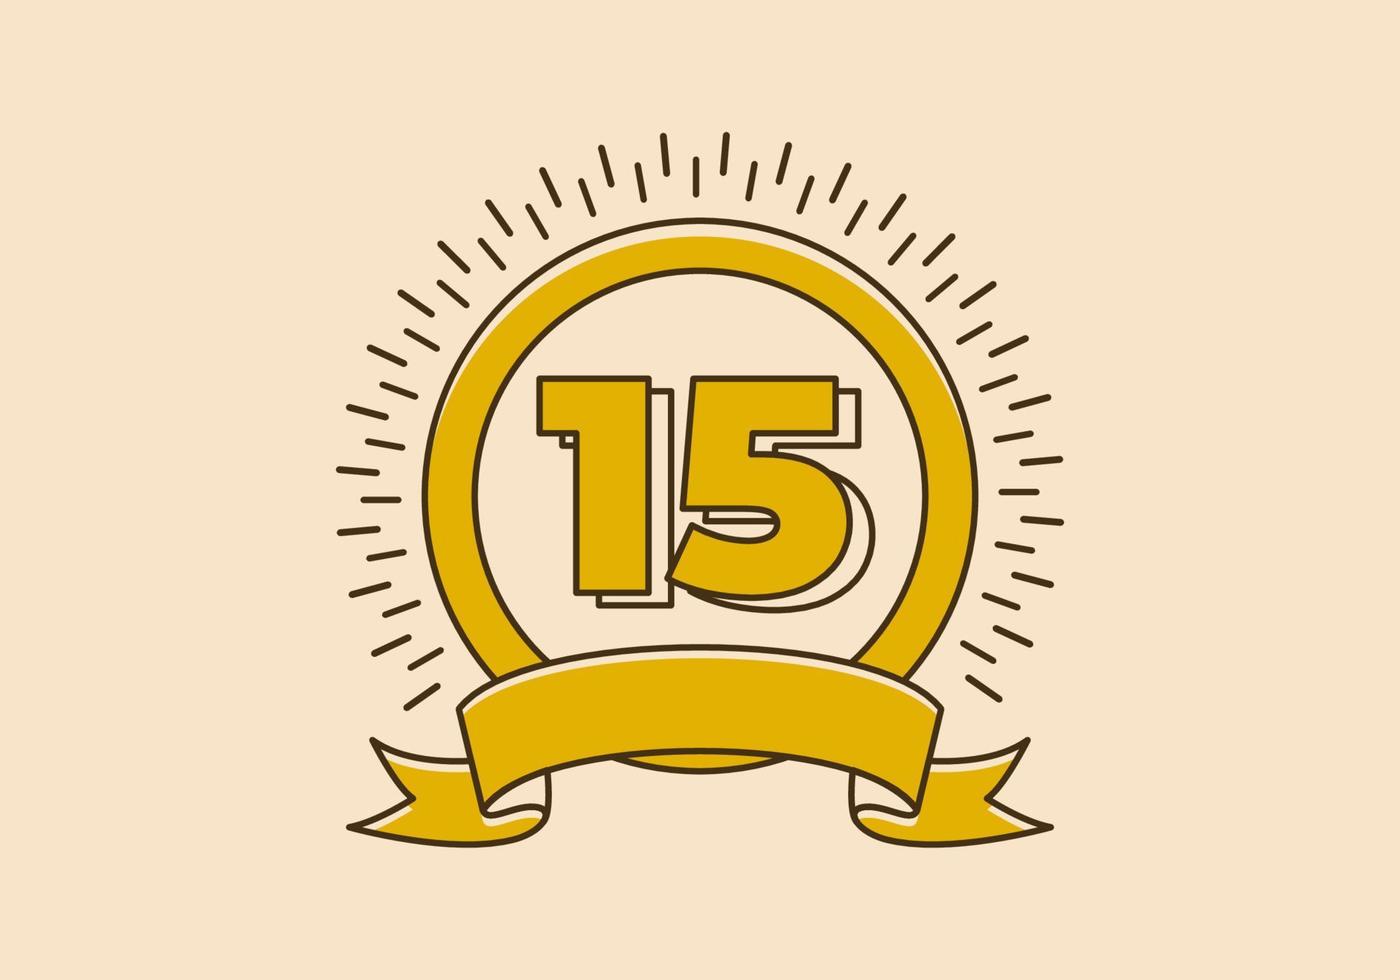 Vintage yellow circle badge with number 15 on it vector